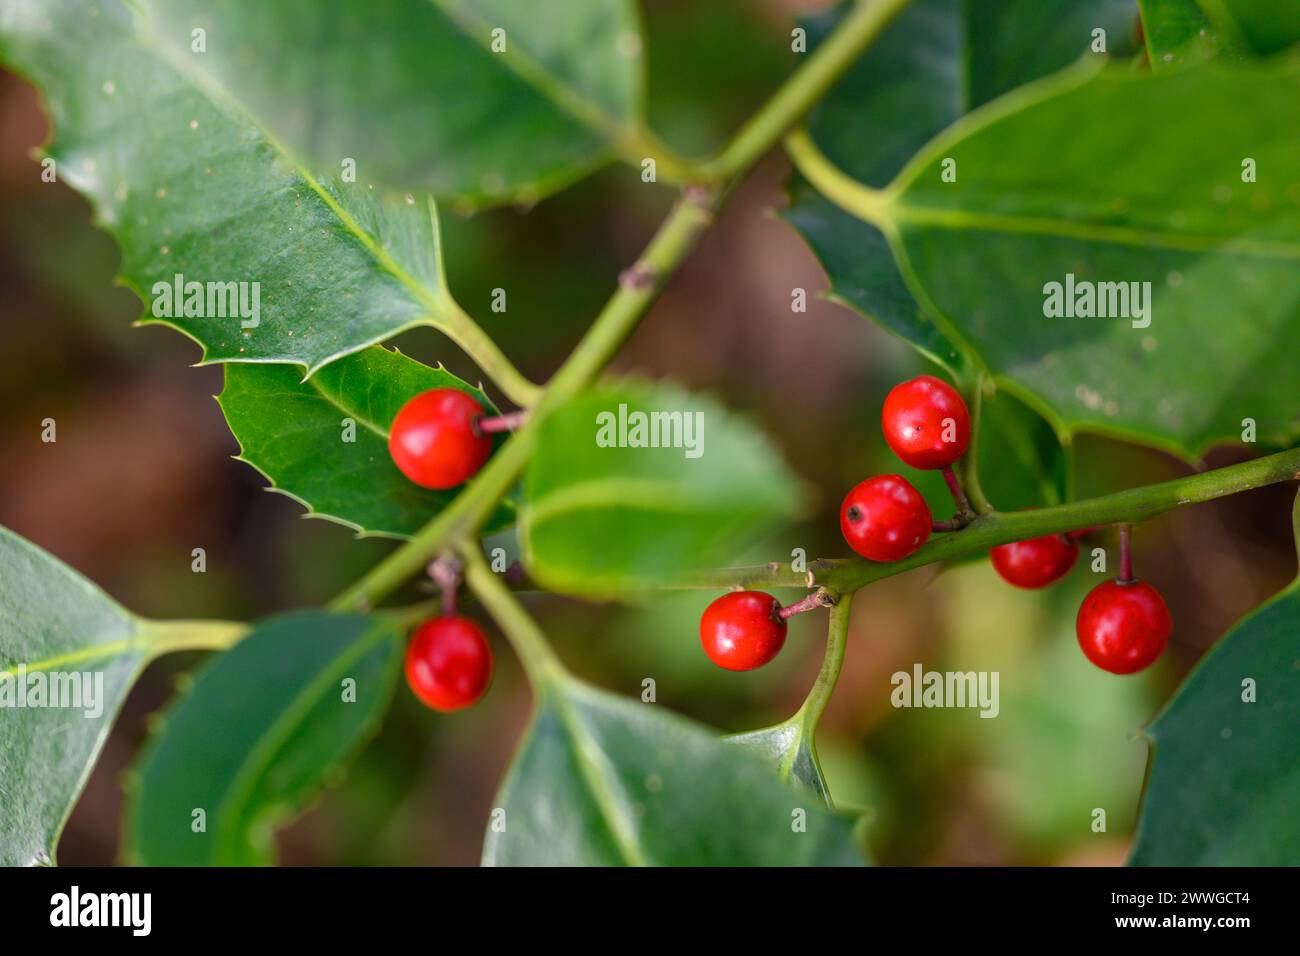 Vibrant red holly berries nestled among glossy green leaves. Stock Photo